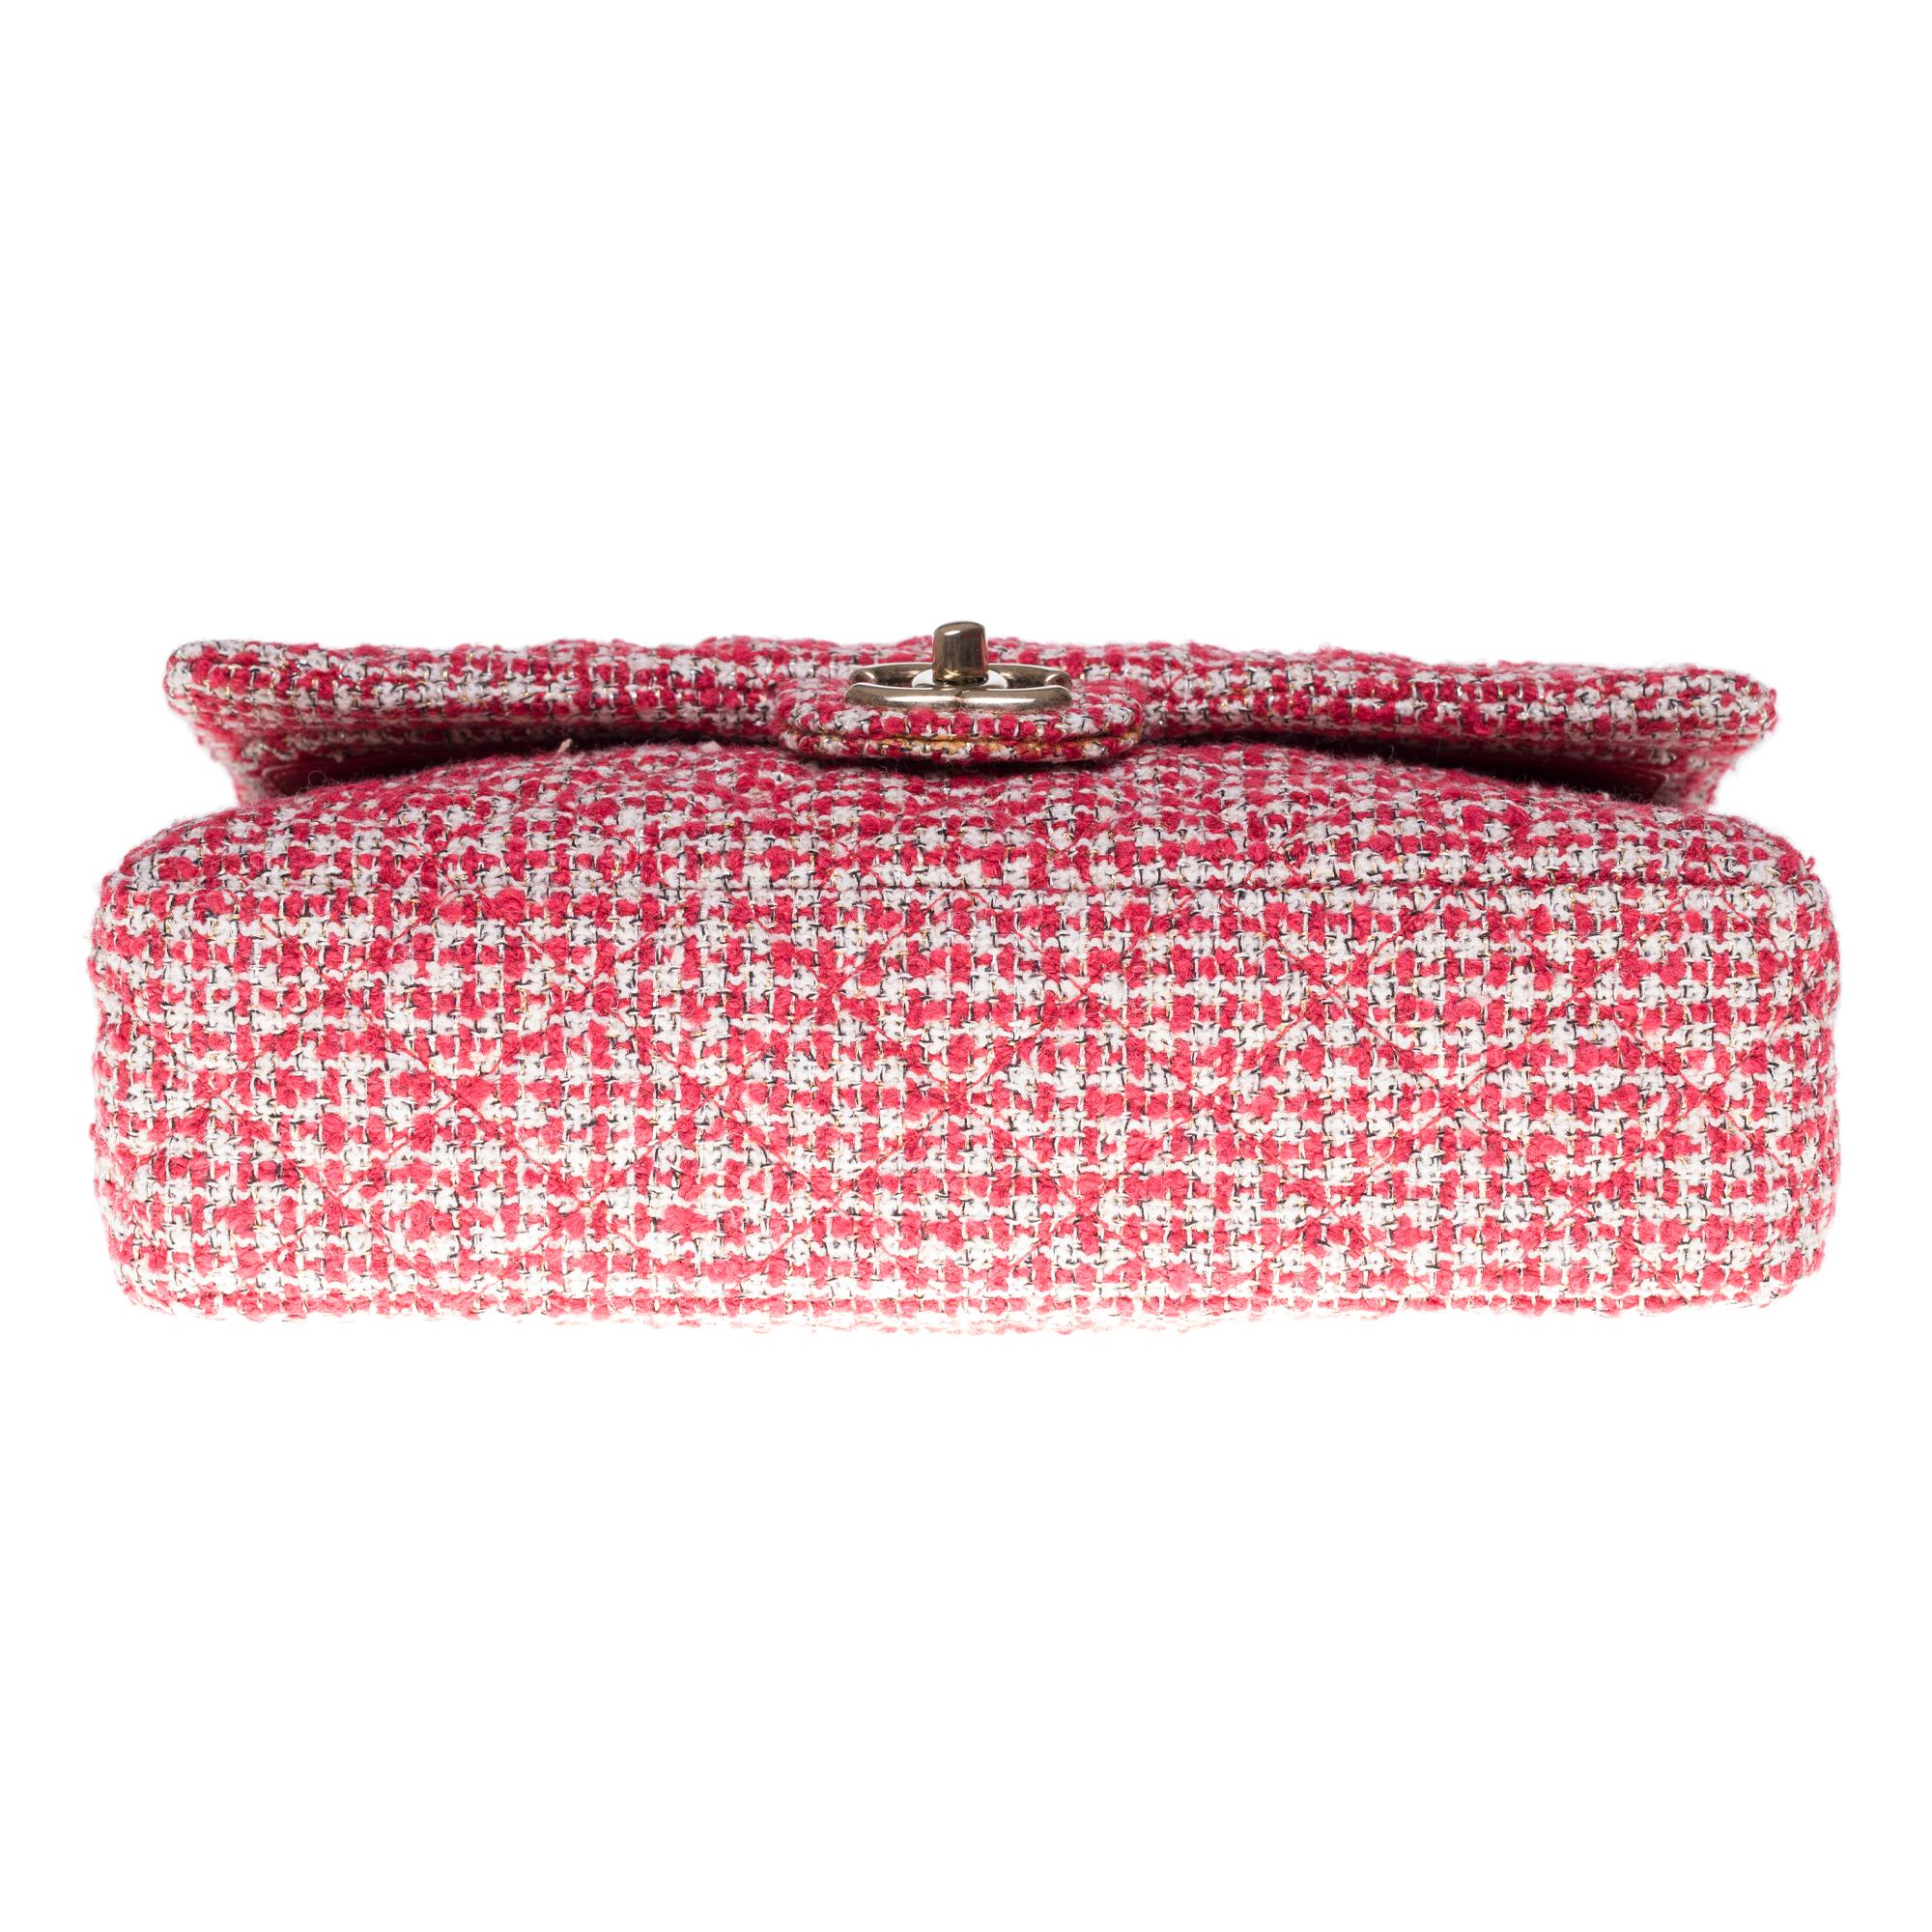 Limited Edition Chanel Timeless Shoulder bag in Red & White Tweed, SHW 4